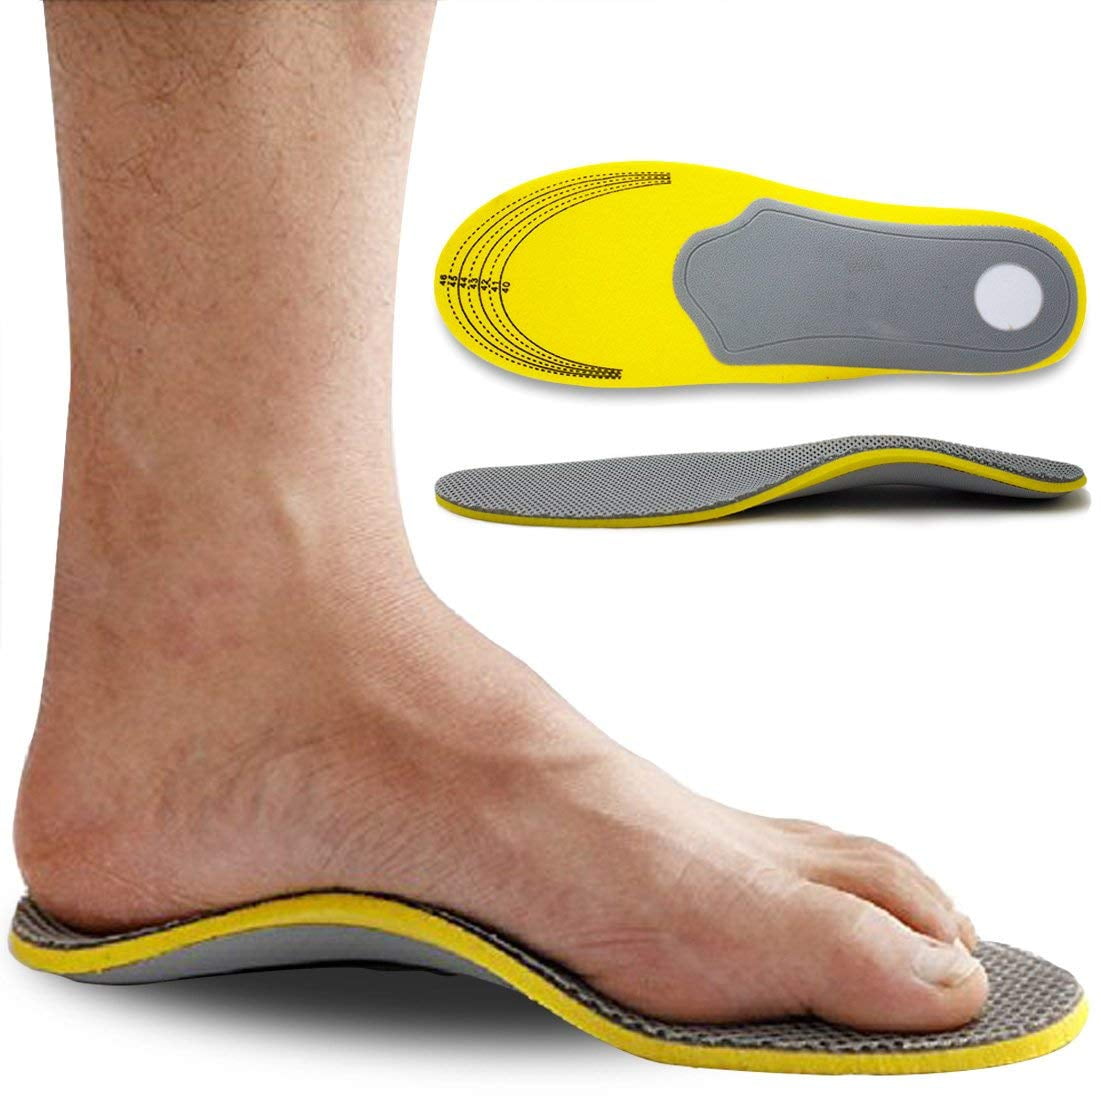 Orthopedic Insole Flat Foot Correction Arch Support Cushion Shoes Insert Unisex 